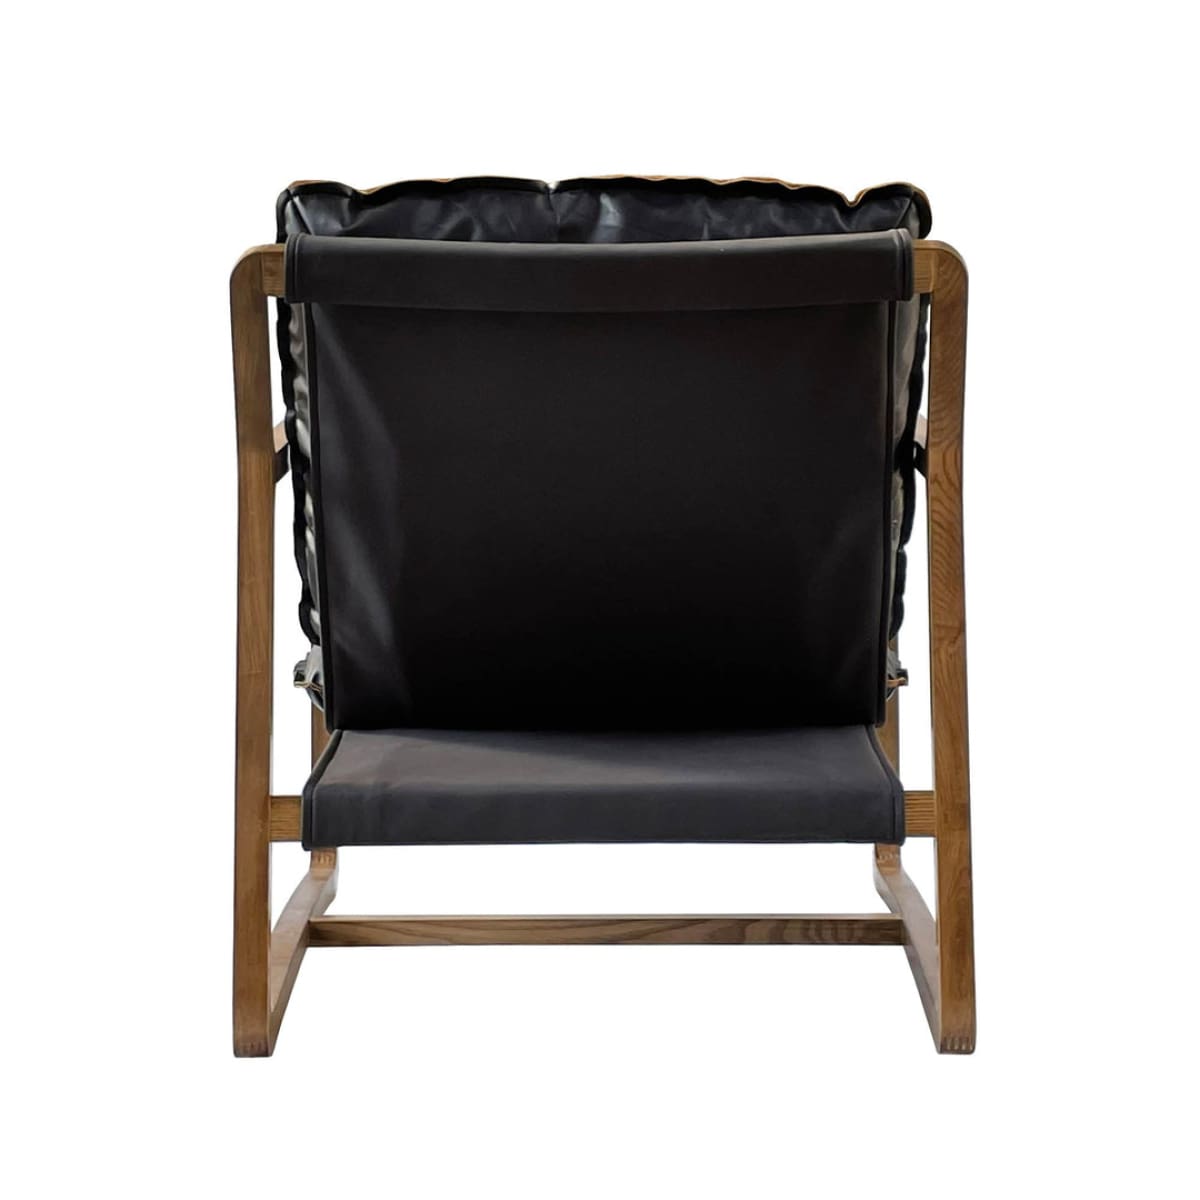 Relax Club Chair - Black Leather With Black Pu Frame - lh-import-accent-club-chairs